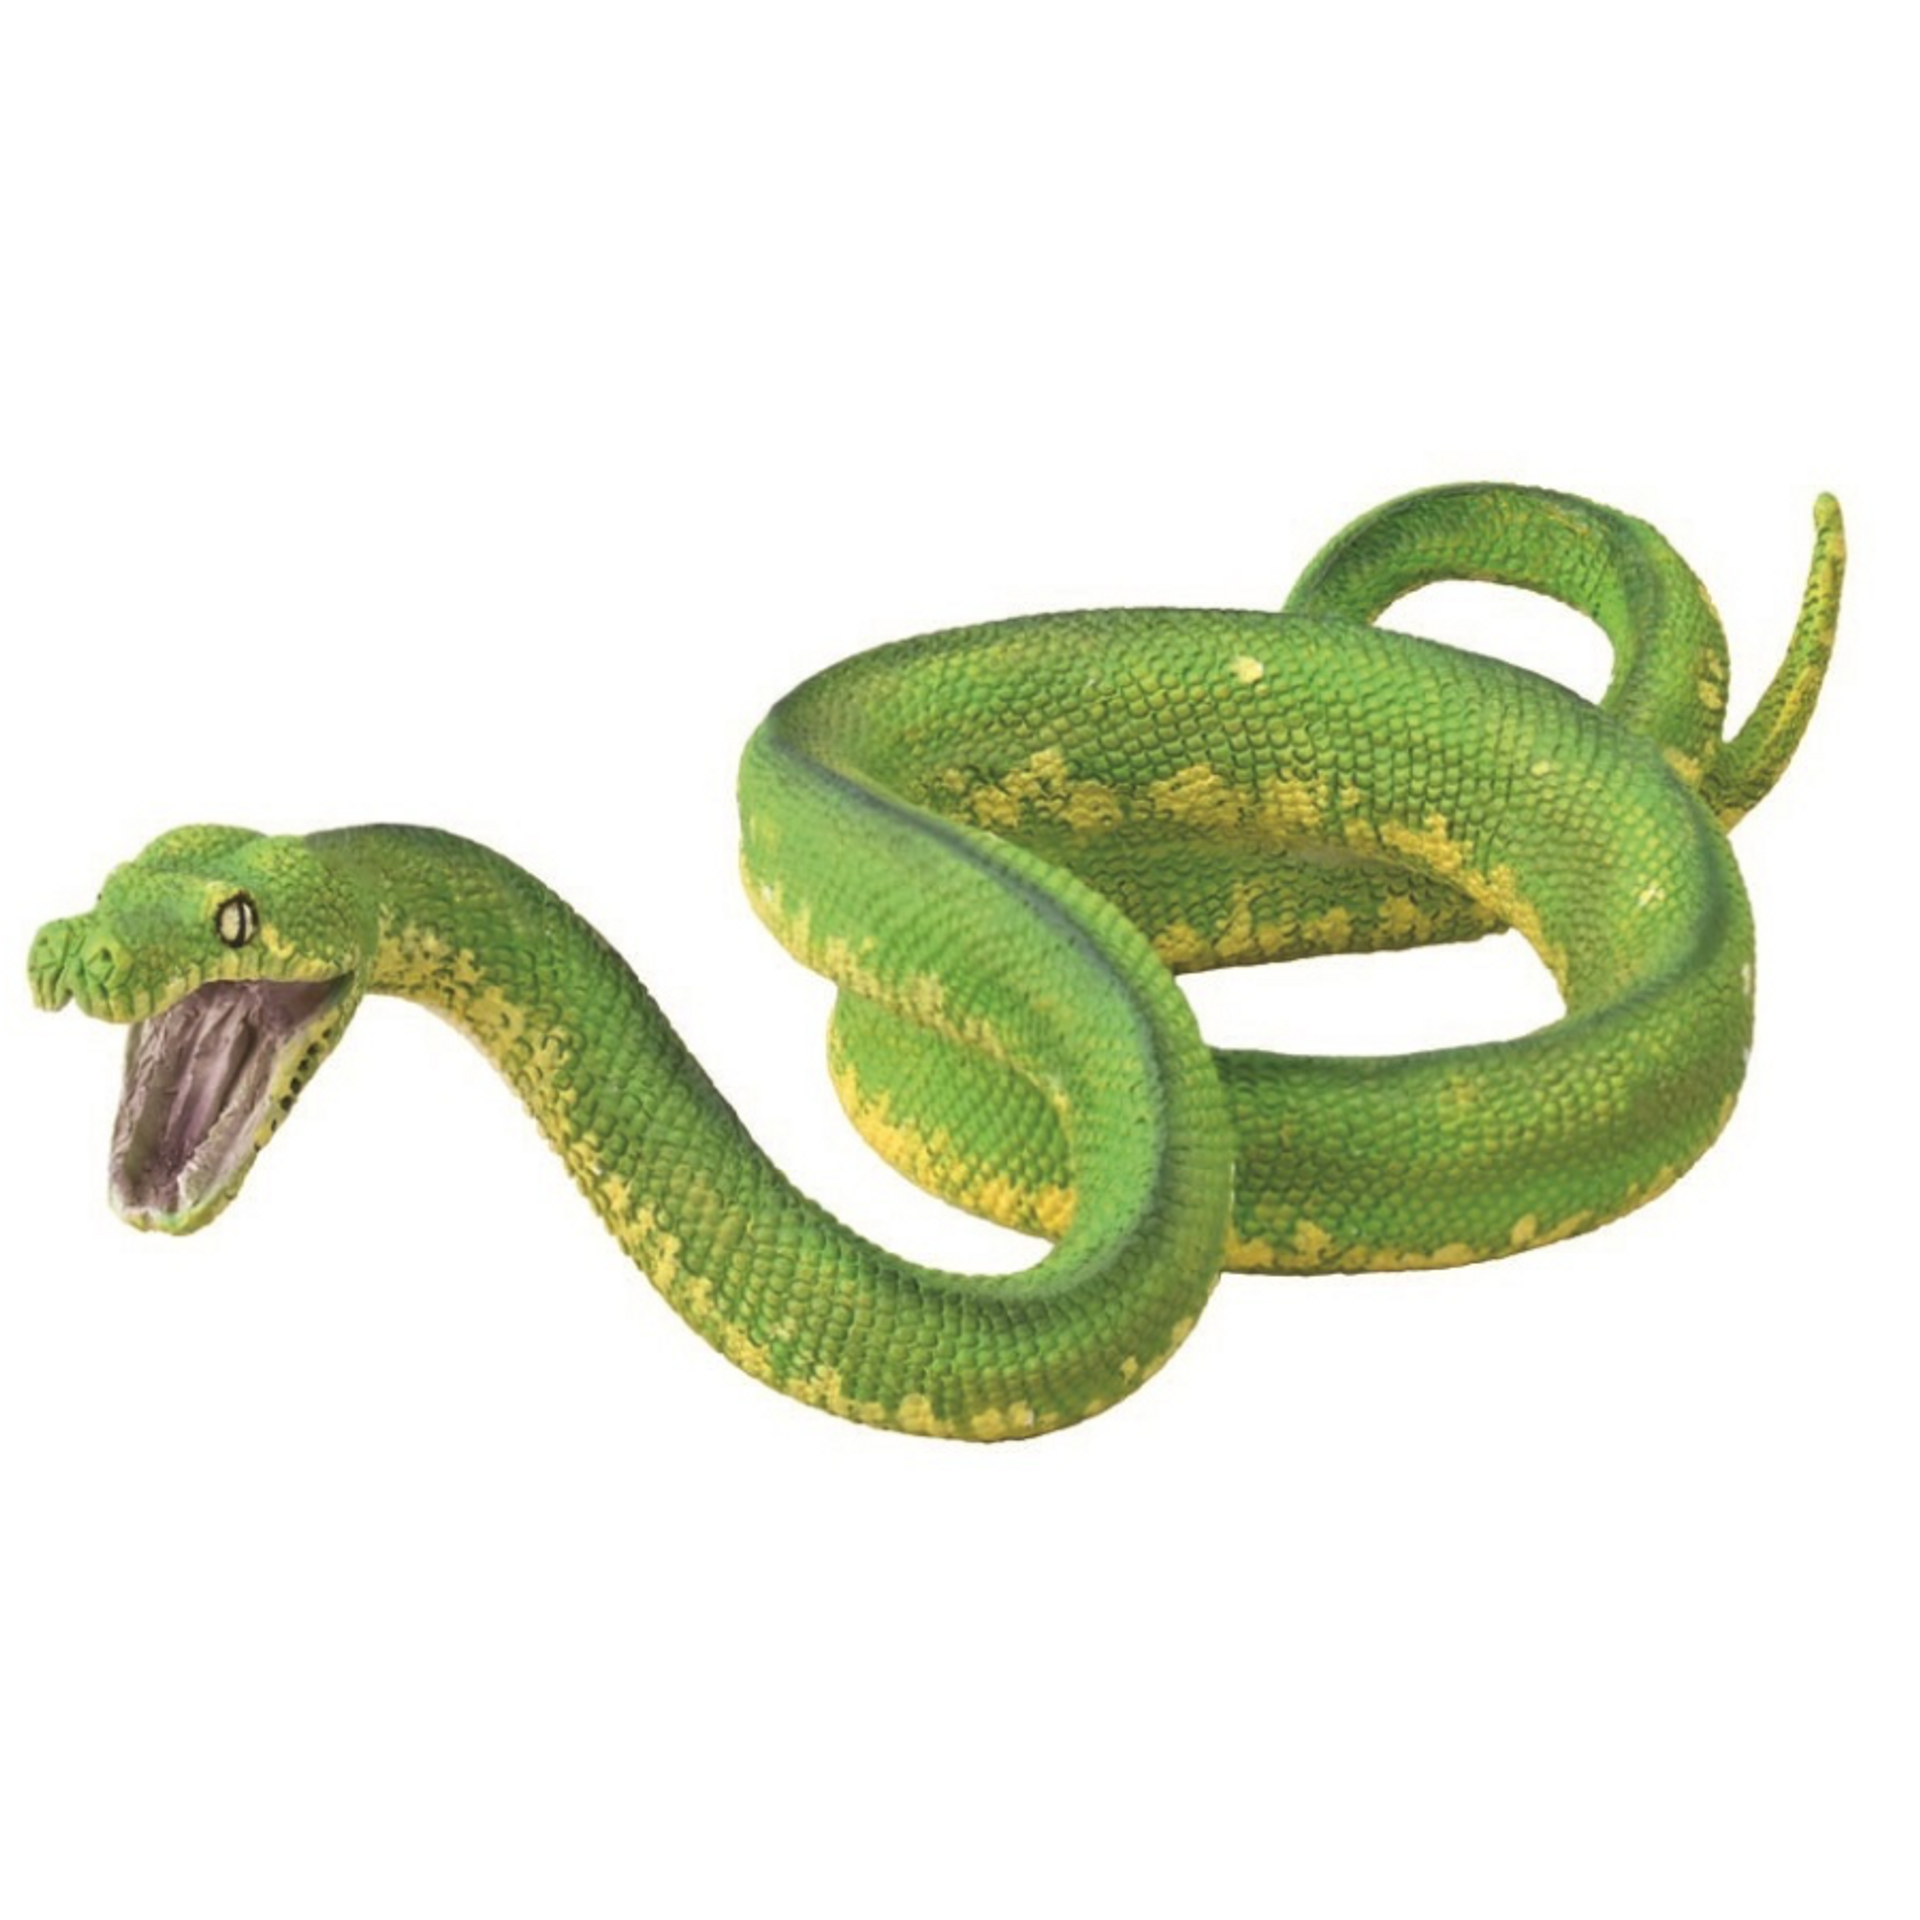 CollectA Green Tree Python | MiniZoo Snakes and Reptiles